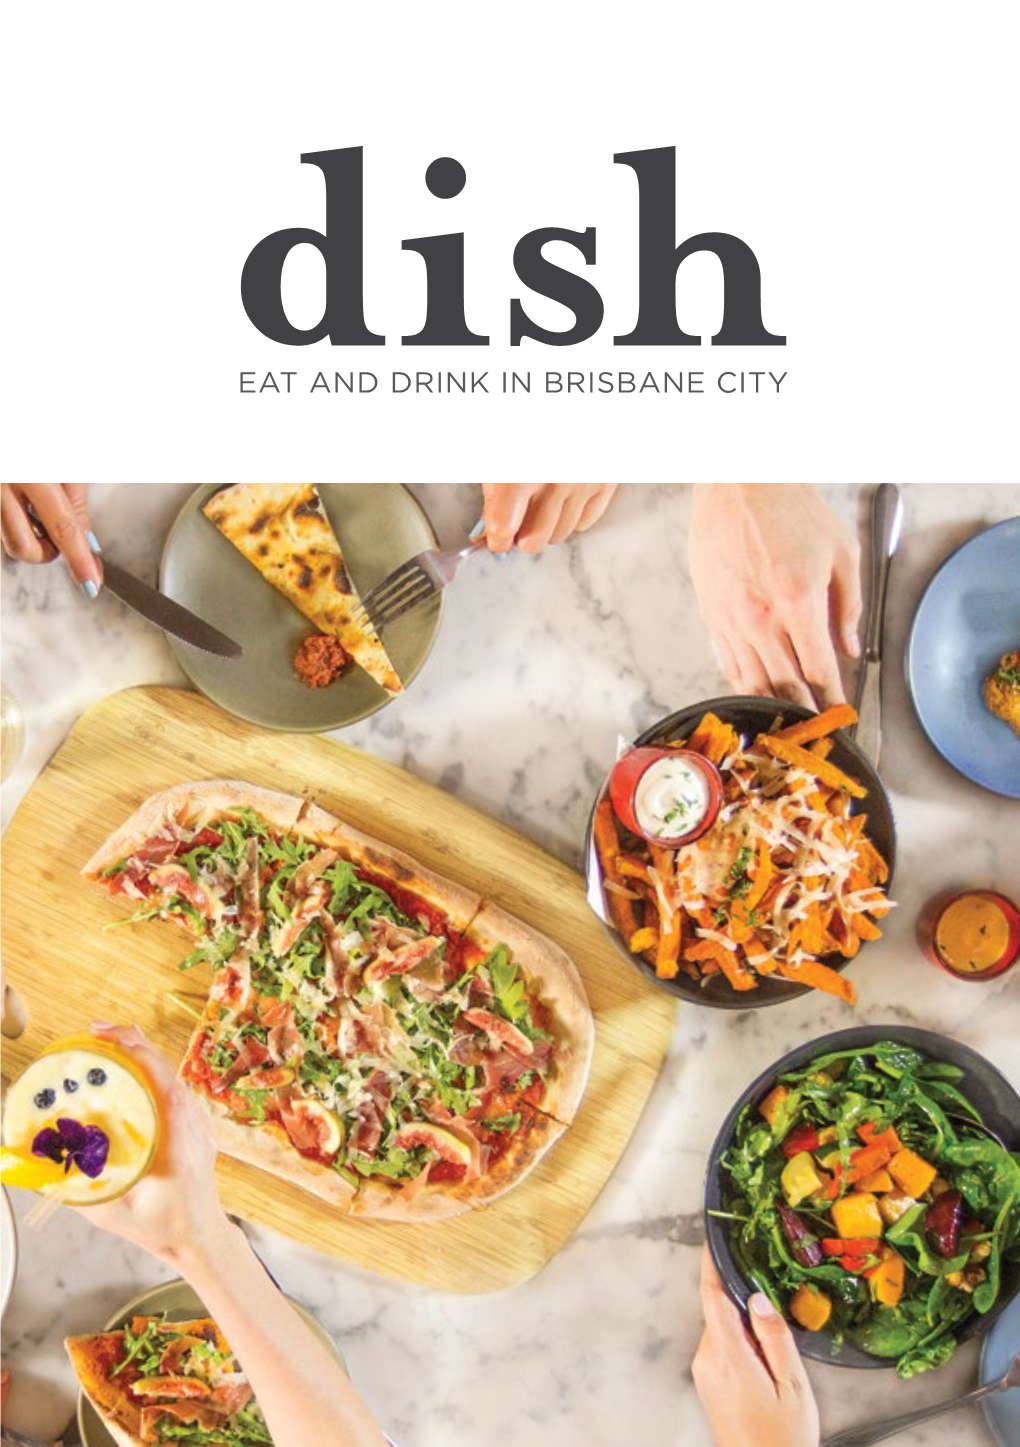 Eat and Drink in Brisbane City